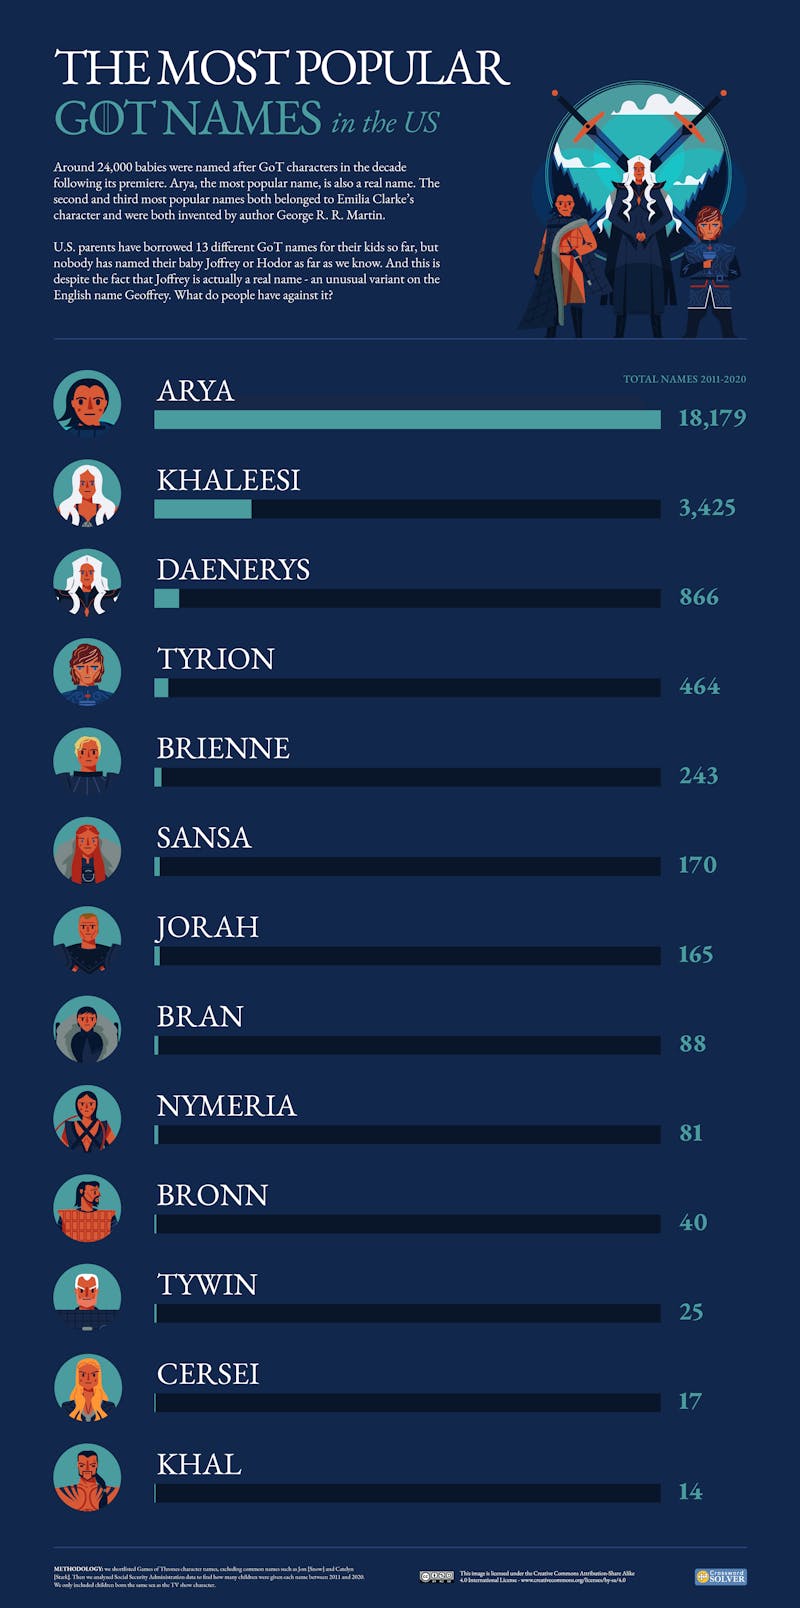 Name of Thrones US Ranking